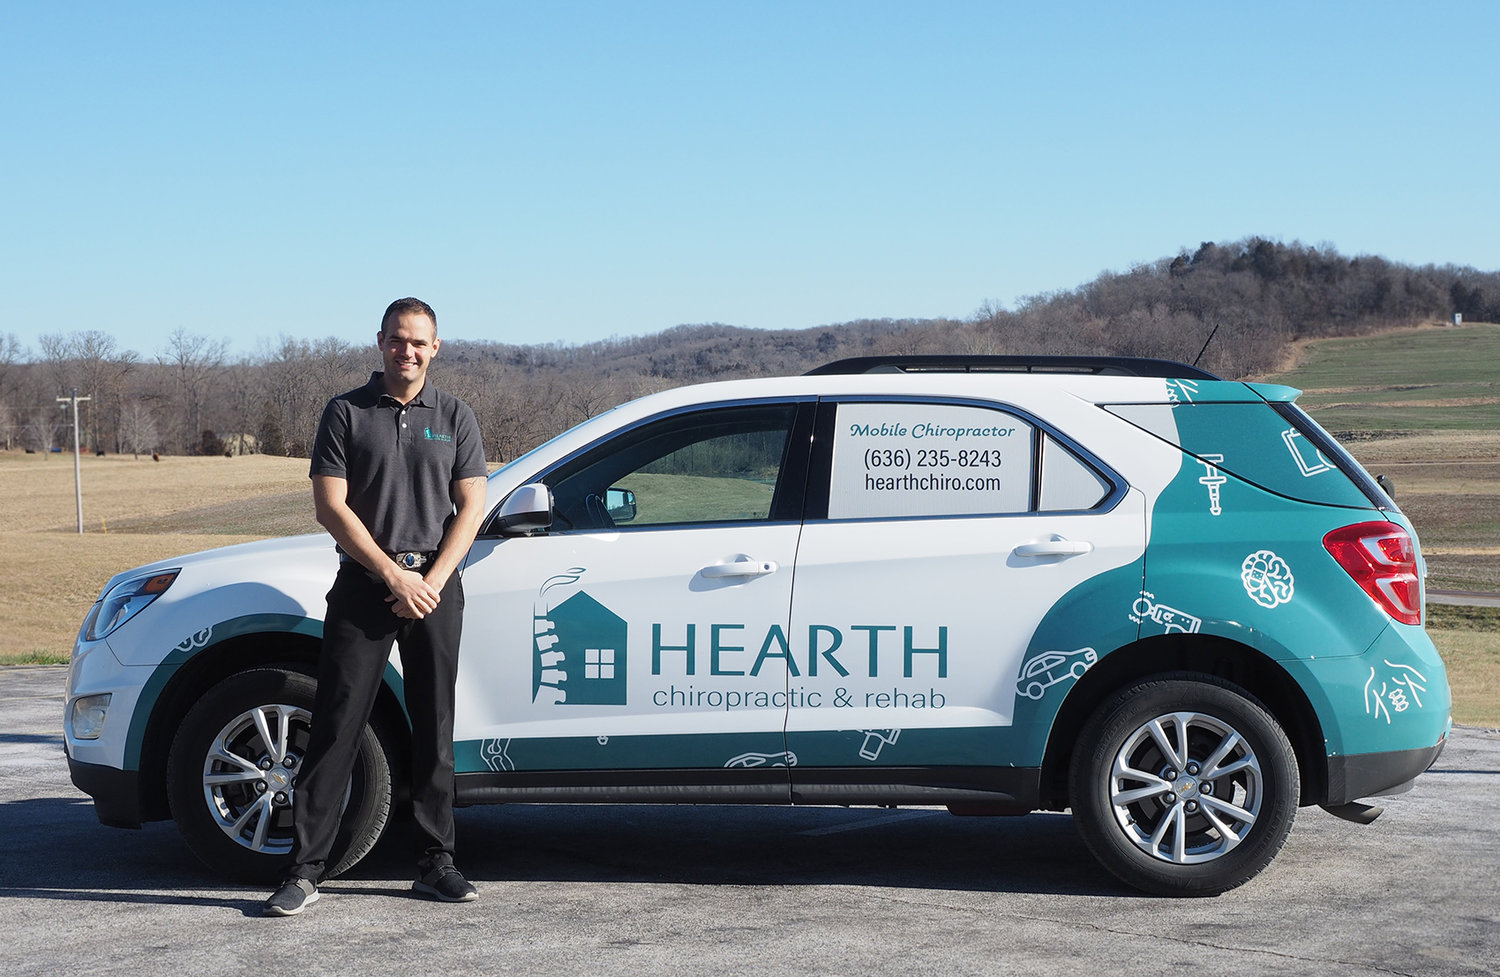 TREATMENT COMES TO YOU — Dr. Ron Kuester, has recently opened Hearth Chiropractic and Rehab, a fully mobile service. Kuester wants to serve those who may wish to have their chiropractic service in their own homes or workplaces. He is located in Marthasville and serves Warren and neighboring counties.